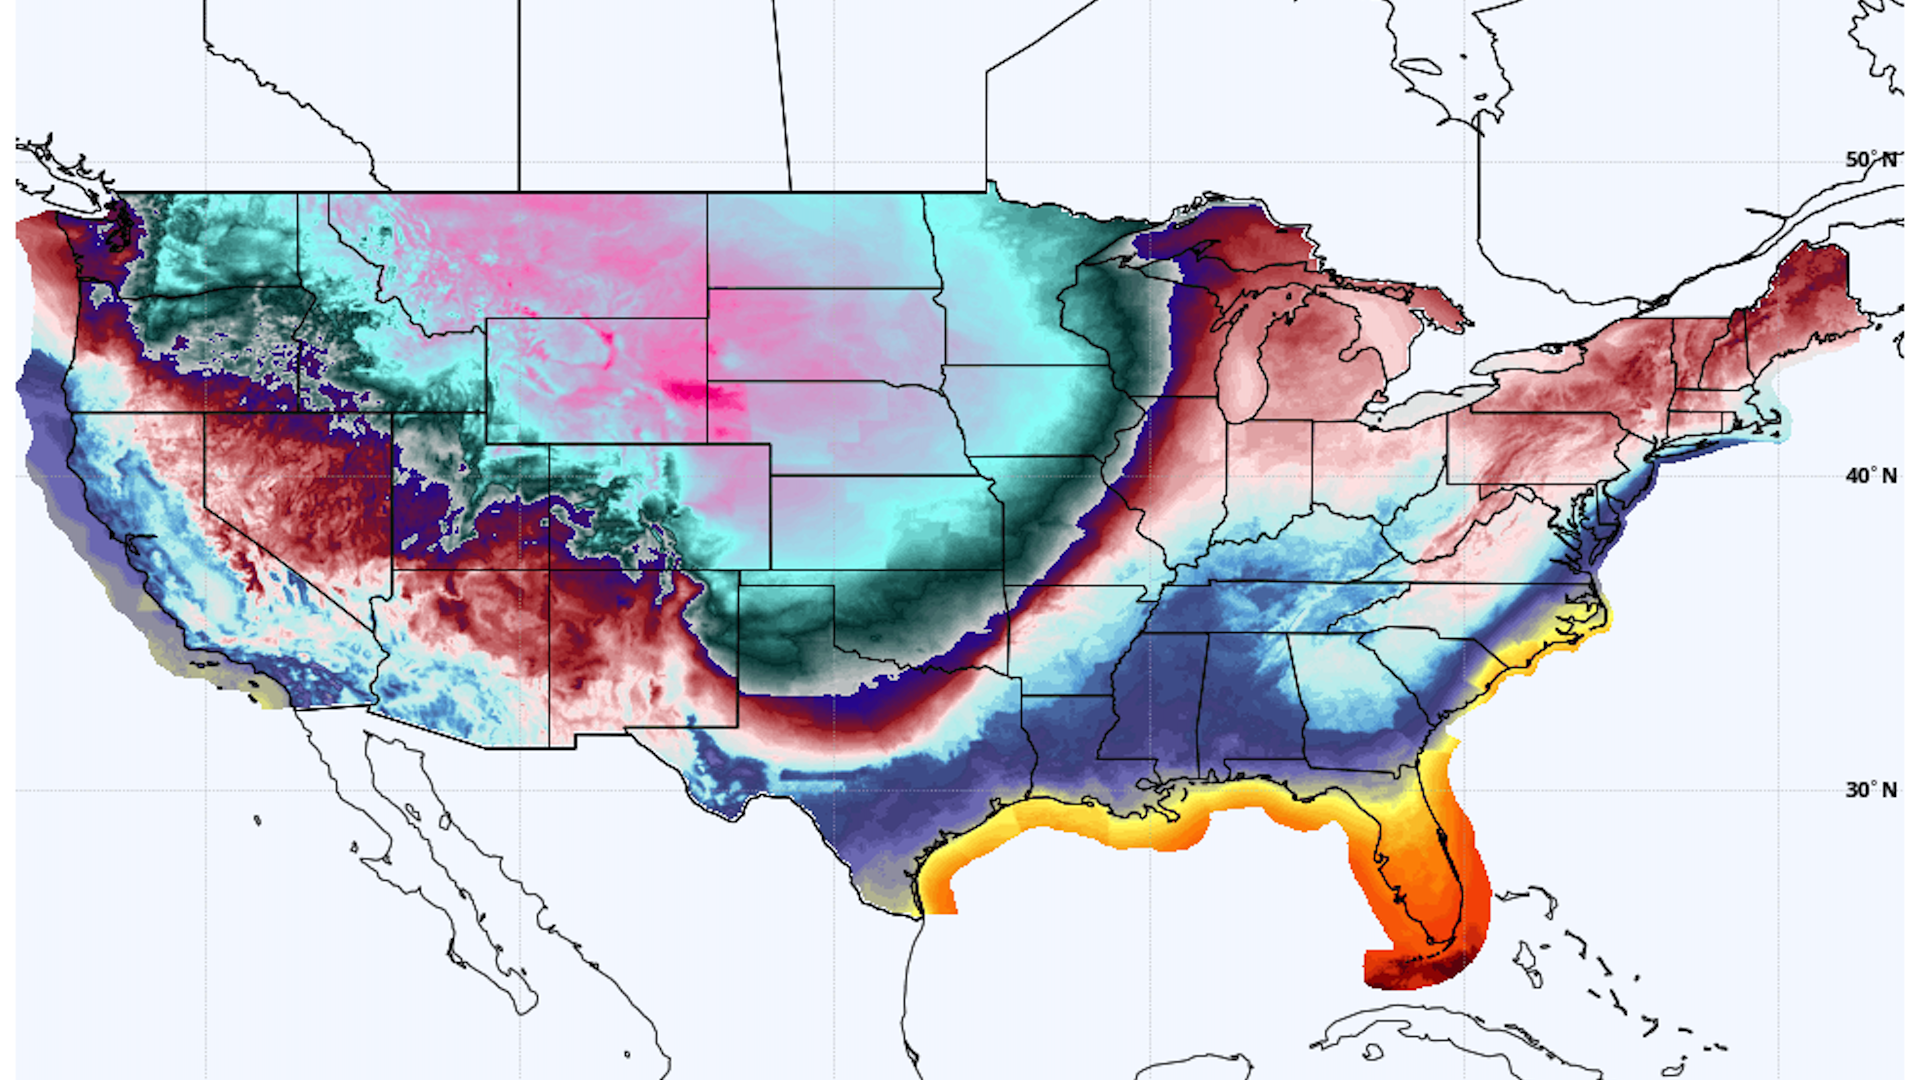 Map of wind chill readings on Dec. 22, showing the sharpness of the cold front across the Central U.S.